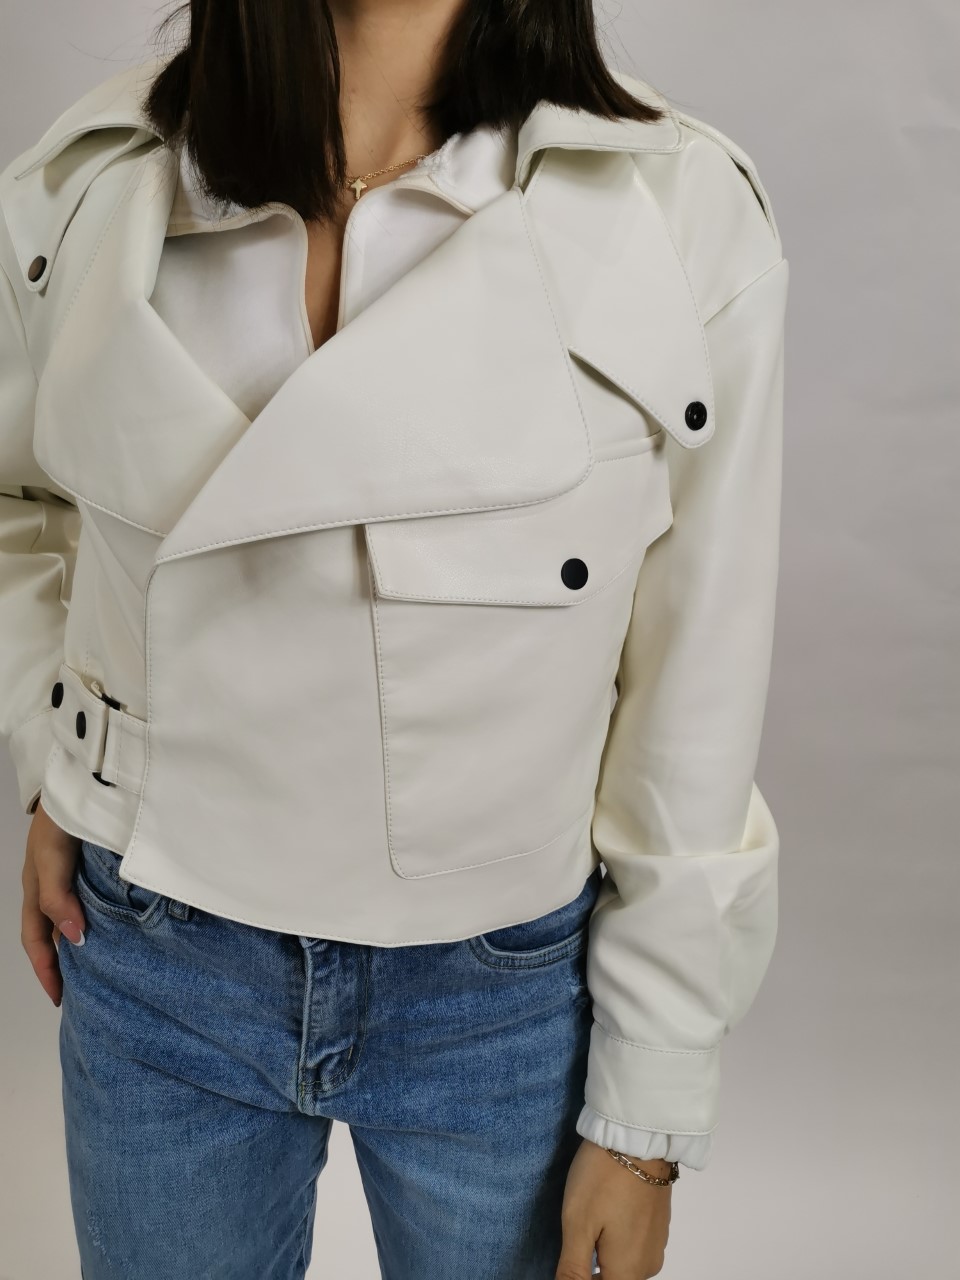 Short leatherette jacket in white color that fastens on the side